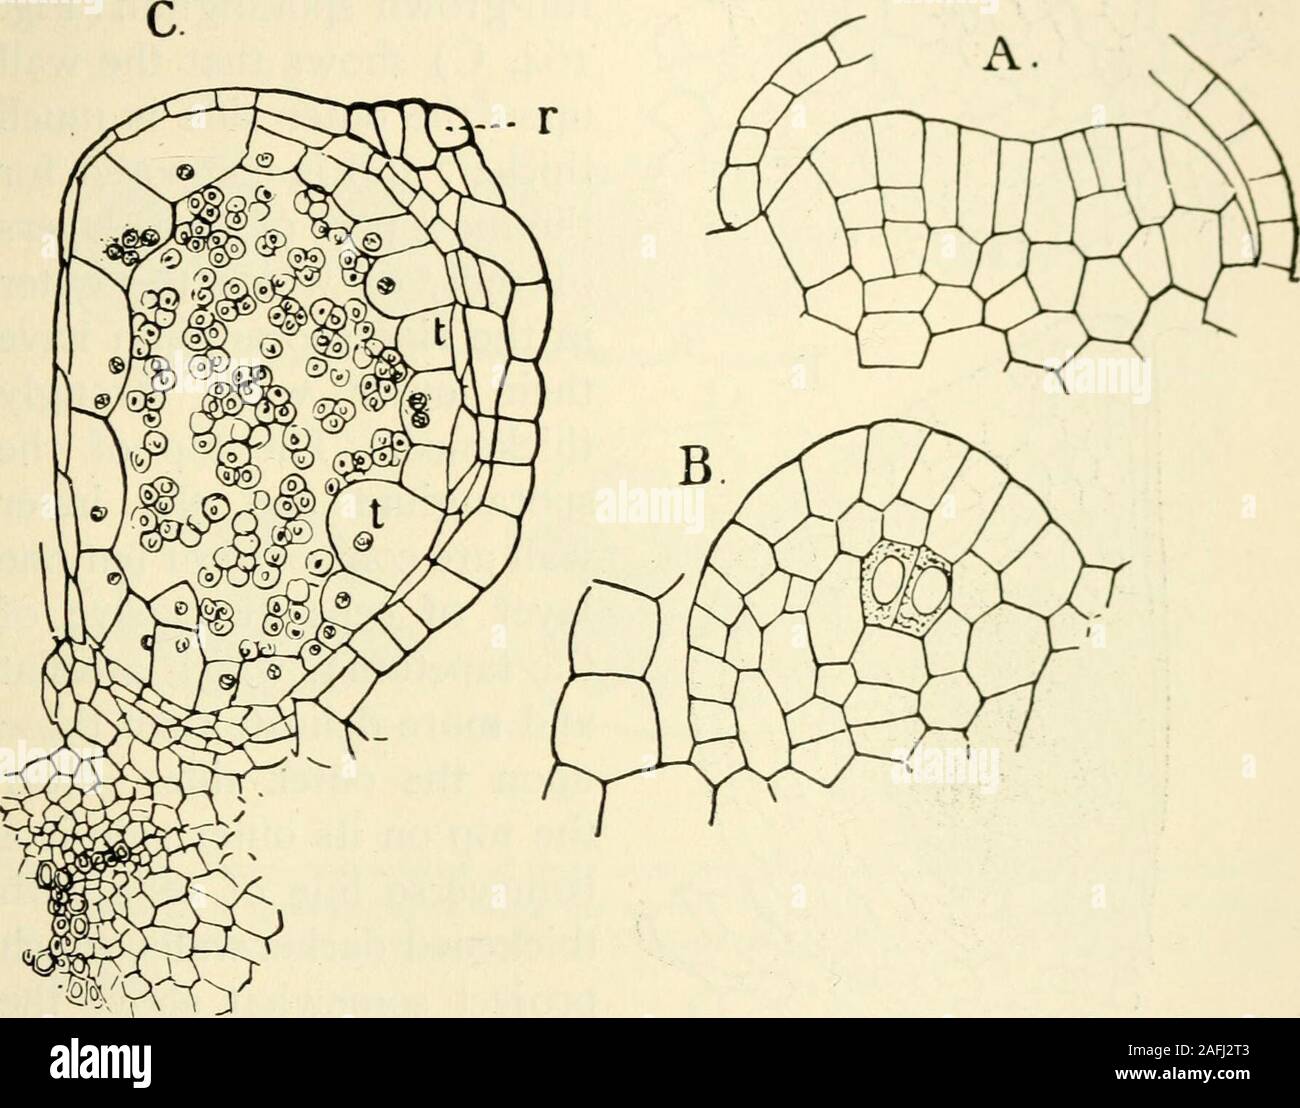 . The structure and development of mosses and ferns (Archegoniatae). s : Tn Marattia the first differentiation of the spo-rangium begins while the young leaf is still rolled up between thestipules of the next older one. The tissue above the fertile veinis more strongly developed than the adjoining parenchyma, andforms an elevated cushion parallel with the vein. This is thereceptacle, which develops two parallel ridges, separated by acleft. These two ridges grow up until they meet, and theiredges grow together and completely close the cleft which lies VIII MARATTIALES 293 between. In each half Stock Photo